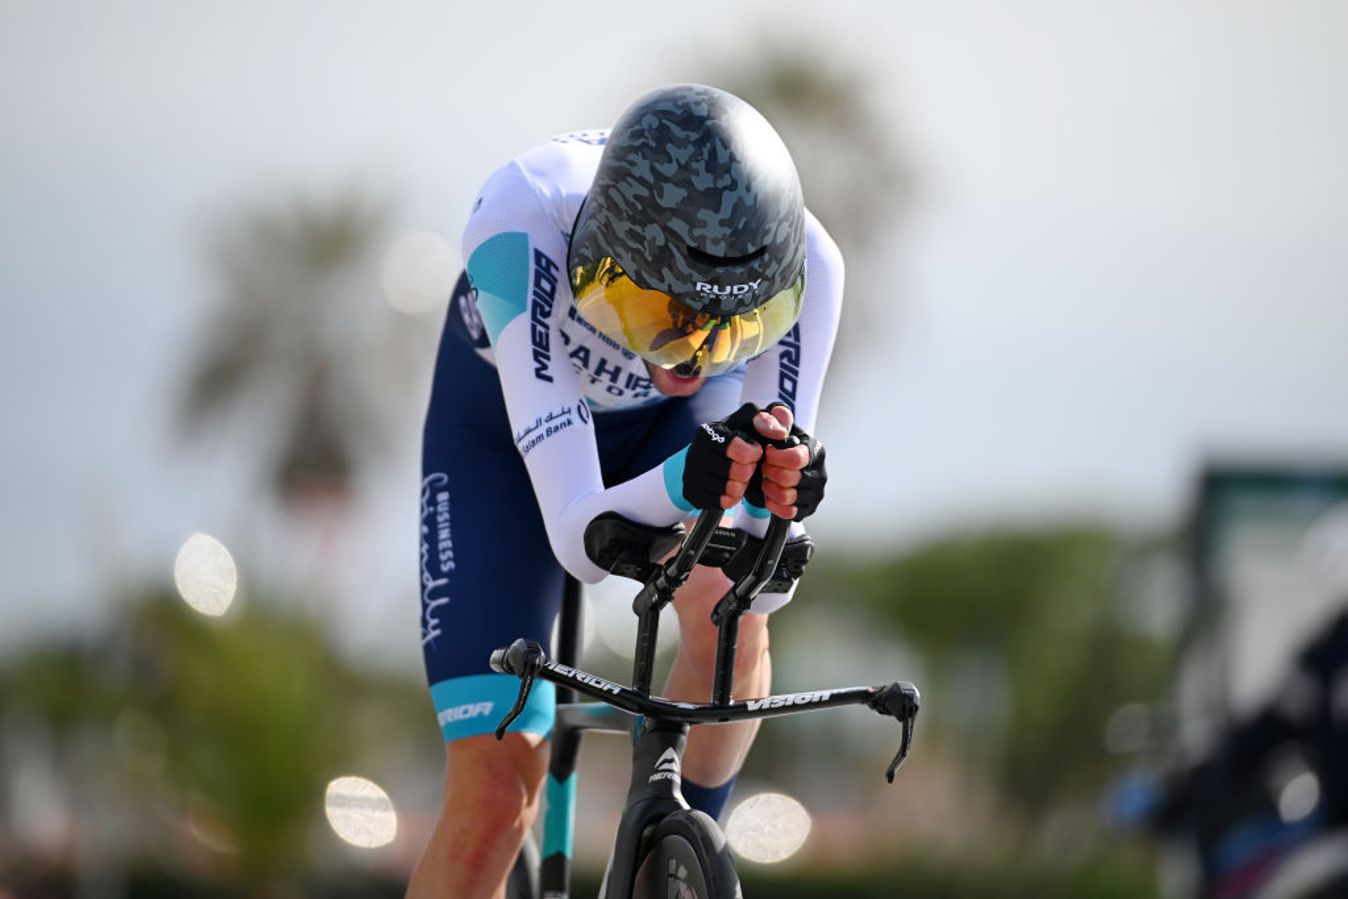 Bahrain Victorious also used a new Rudy helmet at Tirreno-Adriatico